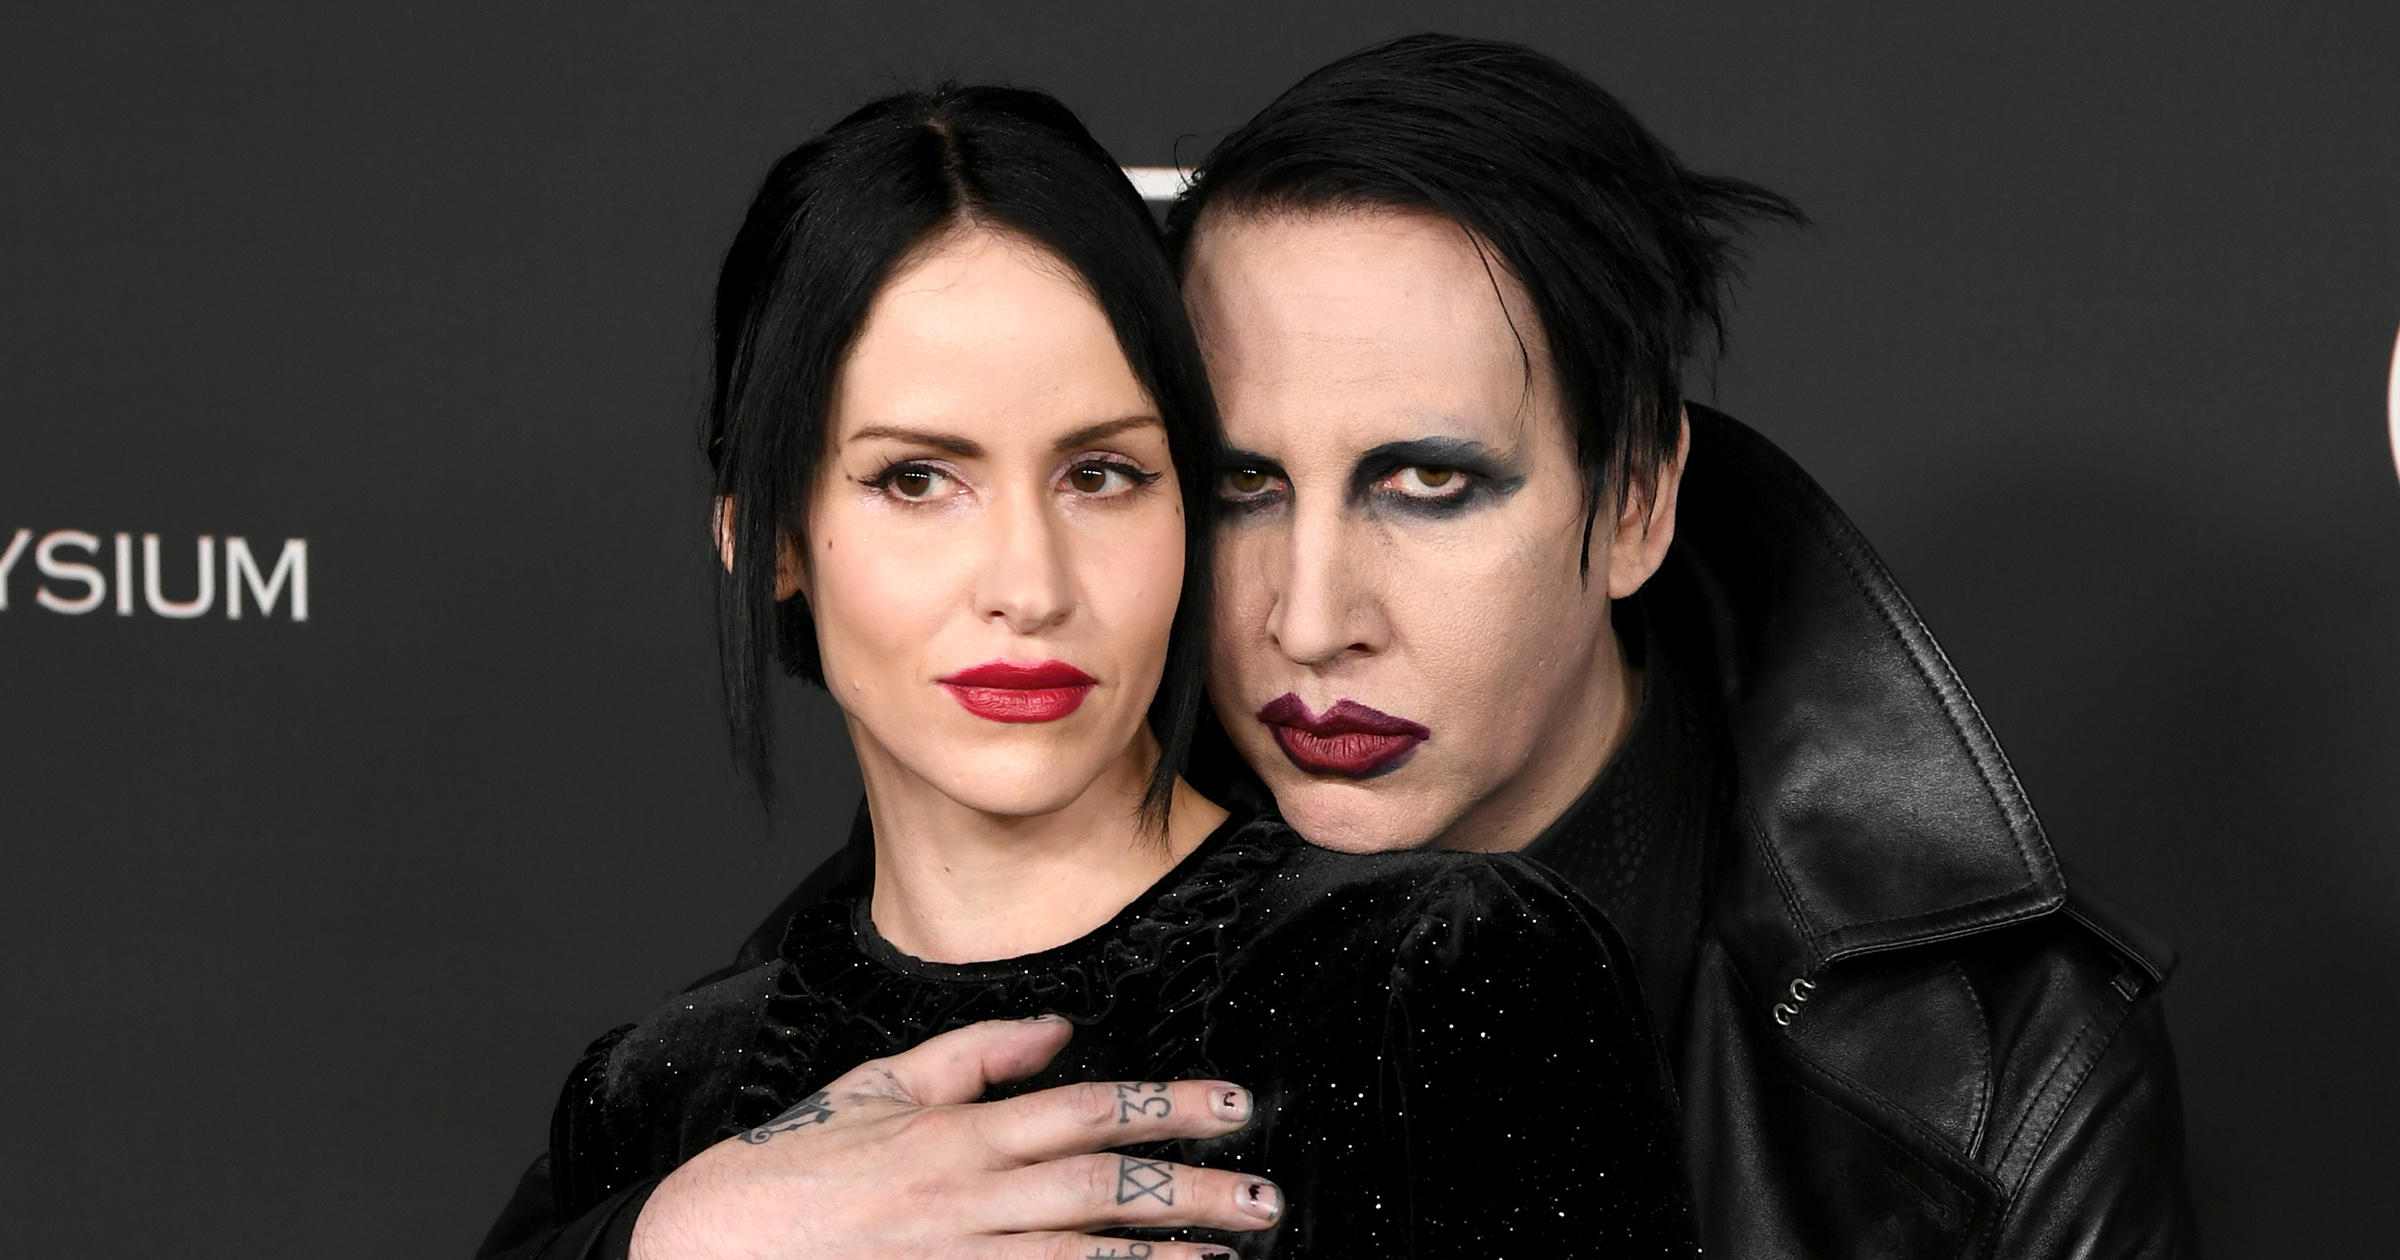 Former Marilyn Manson assistant speaks out, Abuse allegations, Disturbing claims, Troubling behavior, 2400x1260 HD Desktop